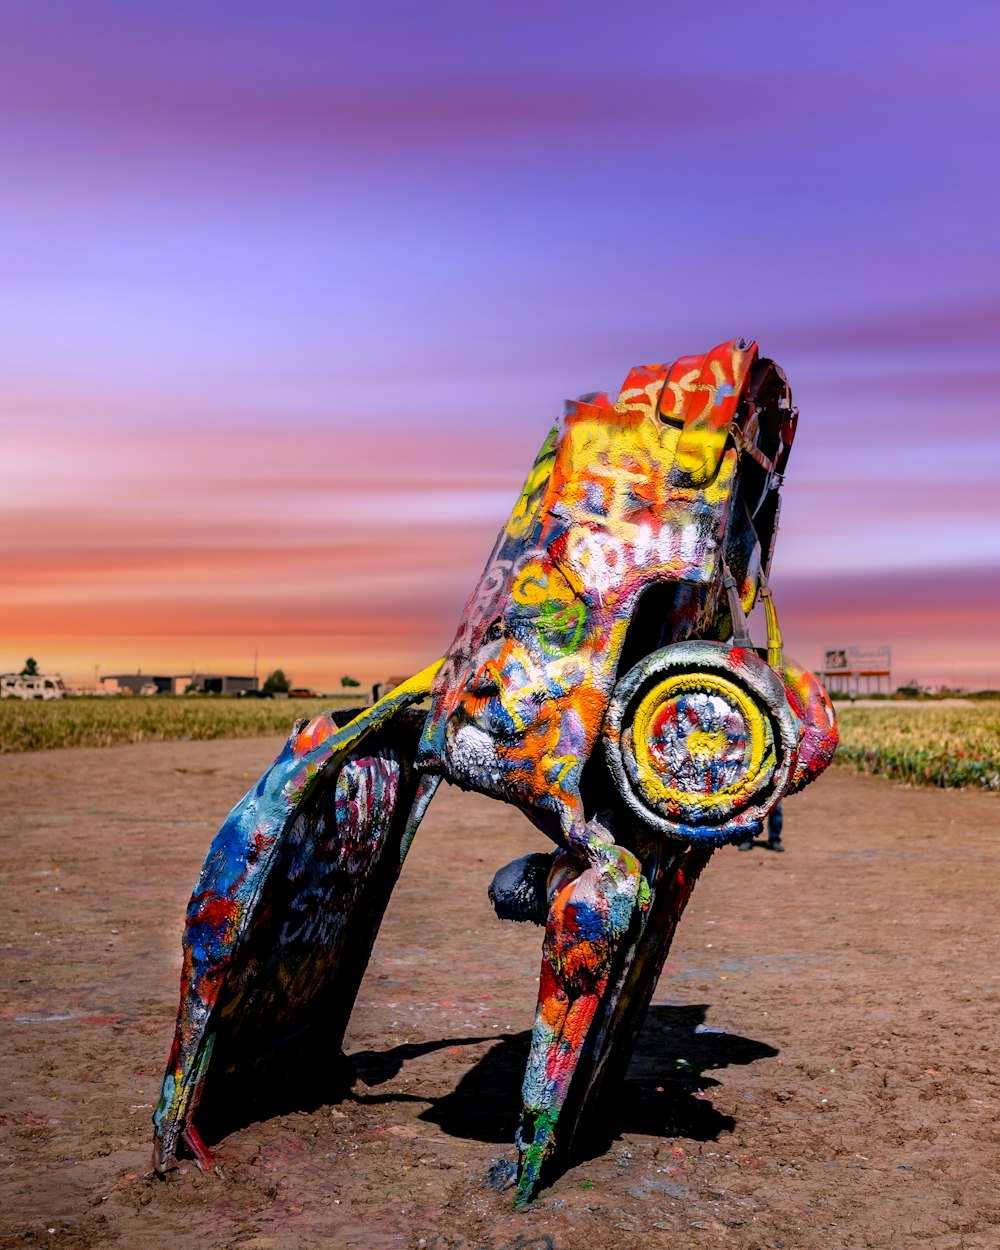 a colorful sculpture of a frog on a dirt ground